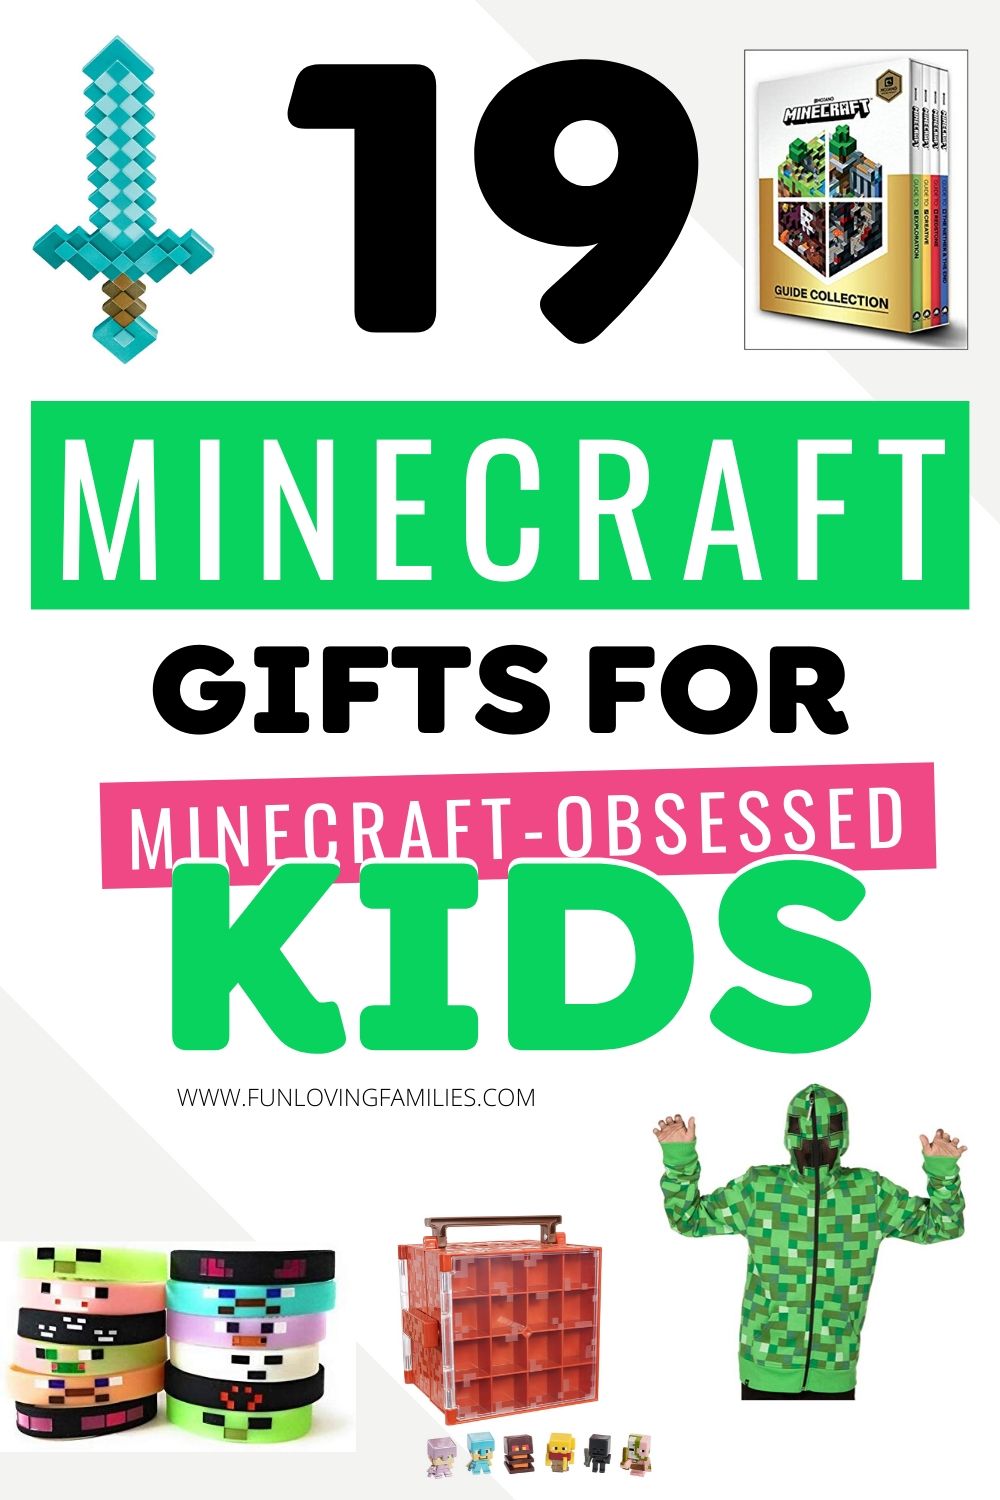 image of minecraft gift ideas for kids